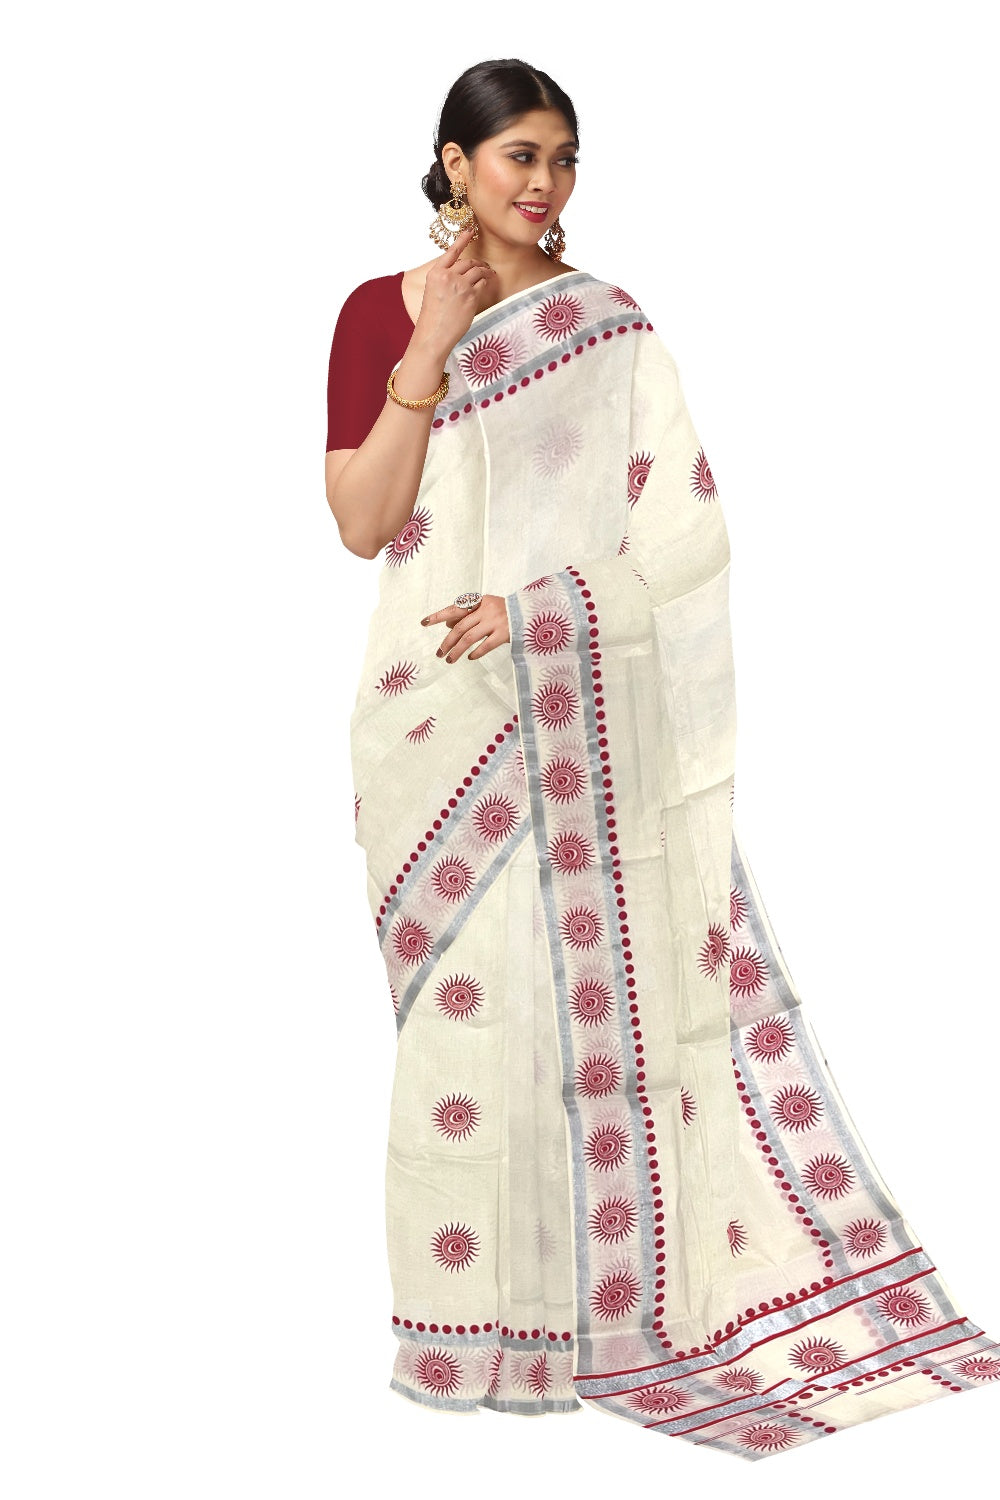 Pure Cotton Kerala Saree with Silver Kasavu Red Block Prints on Border and Tassels Works